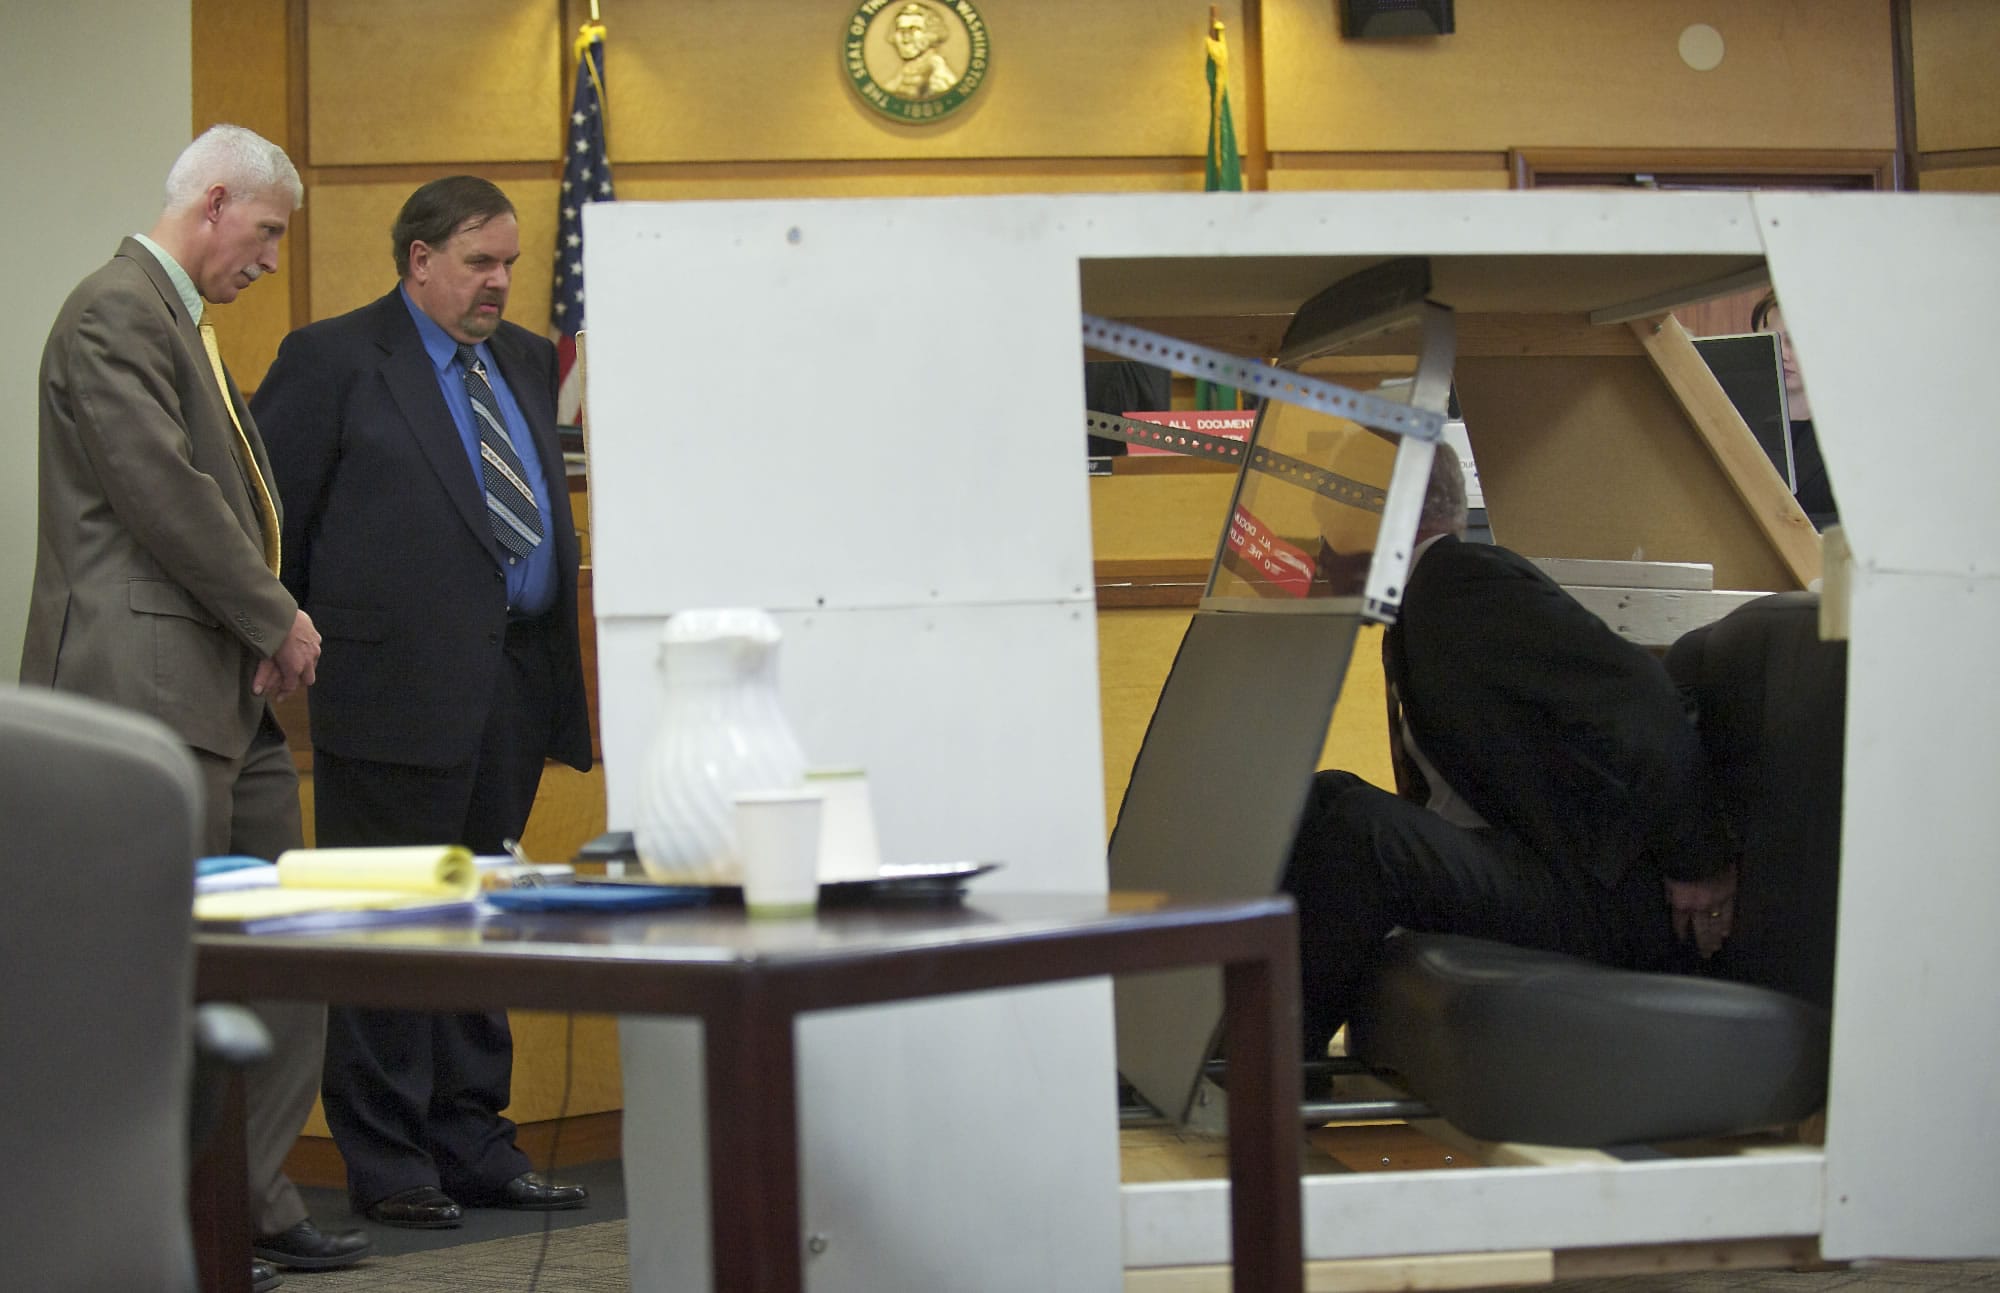 Defense expert witness Jim Pierce positions former Washougal police Officer Robert Ritchie, second from left, and his attorney, Jaime Goldberg, right, Thursday to re-enact what happened between Ritchie and Tyler Lampman inside a life-size model of Ritchie's patrol car.